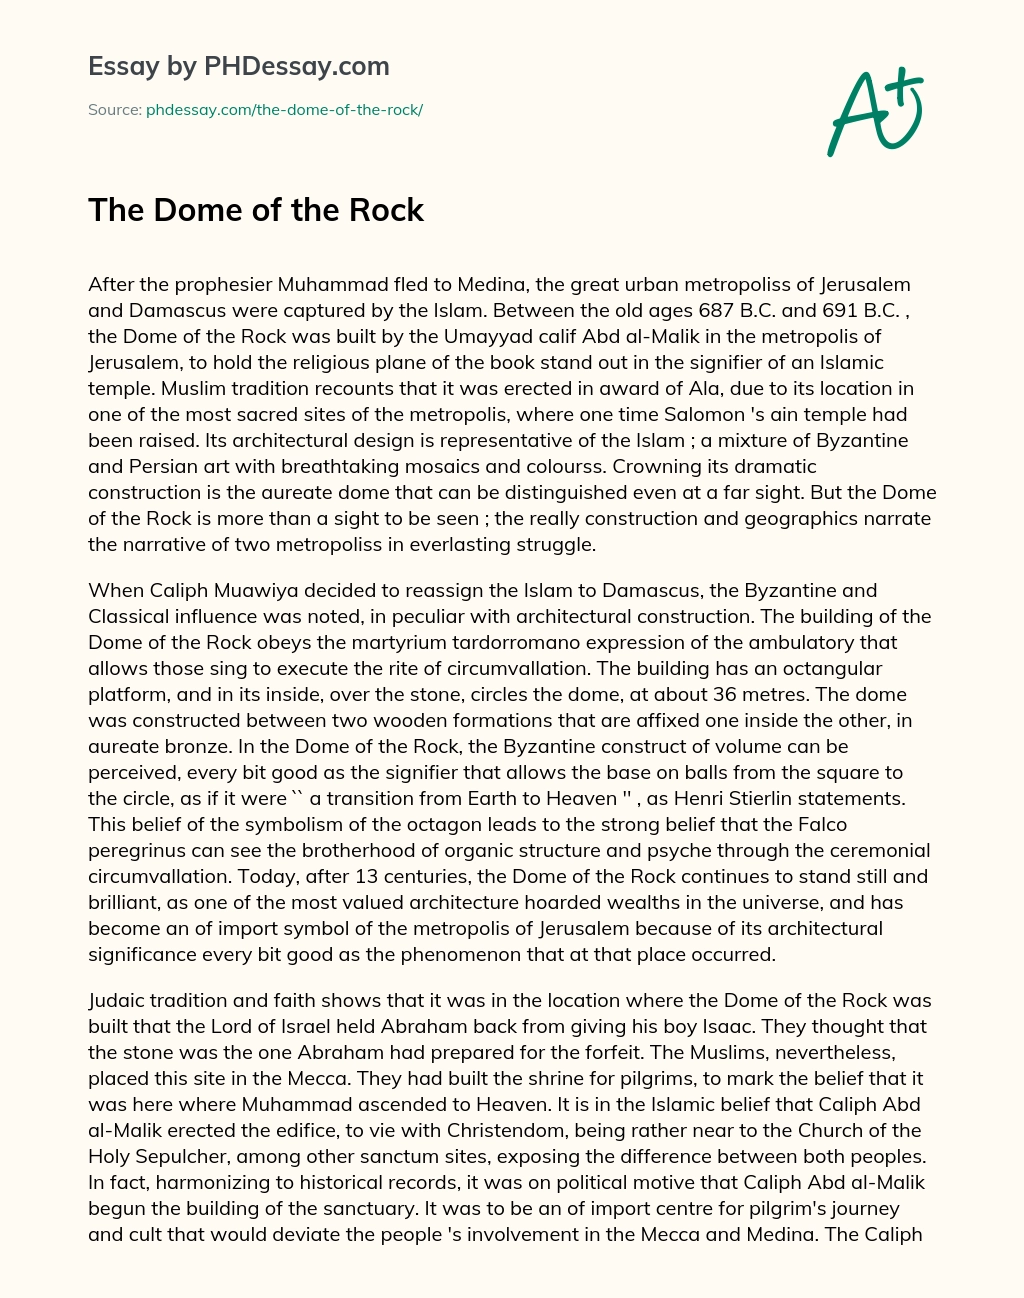 The Dome of the Rock essay